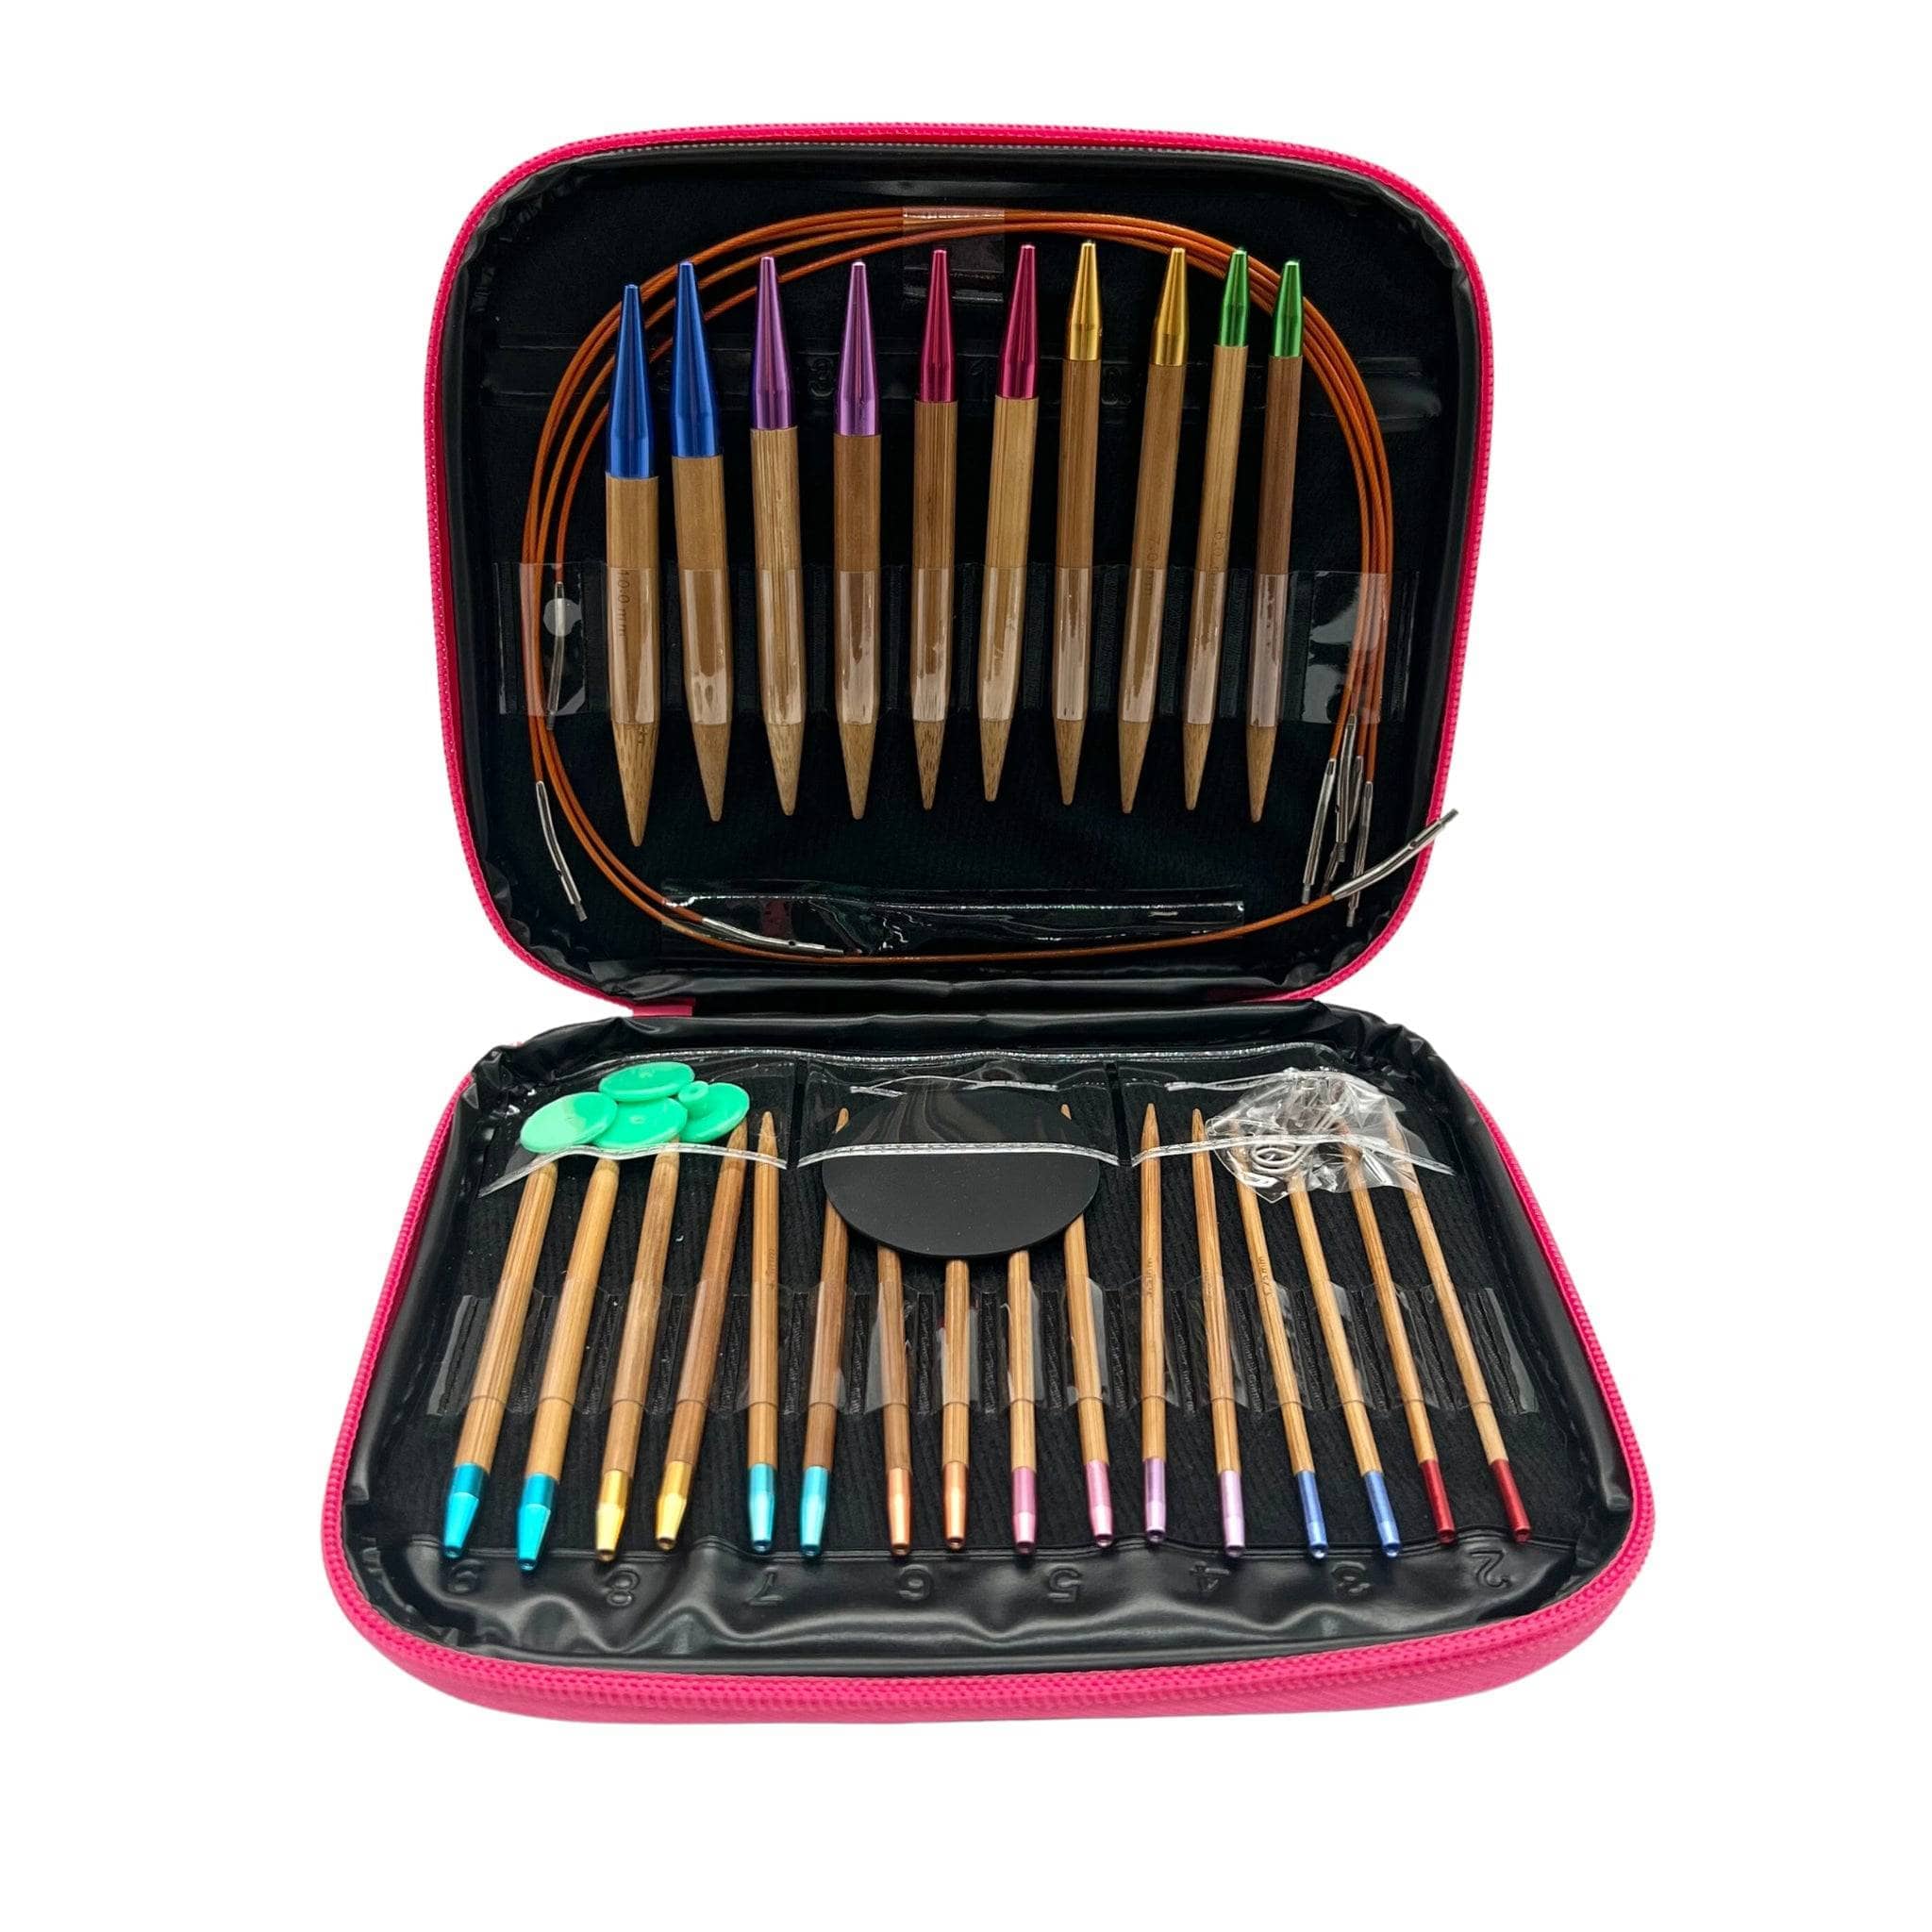 Knitting Needle Assortment set of 32 for $15 - arts & crafts - by